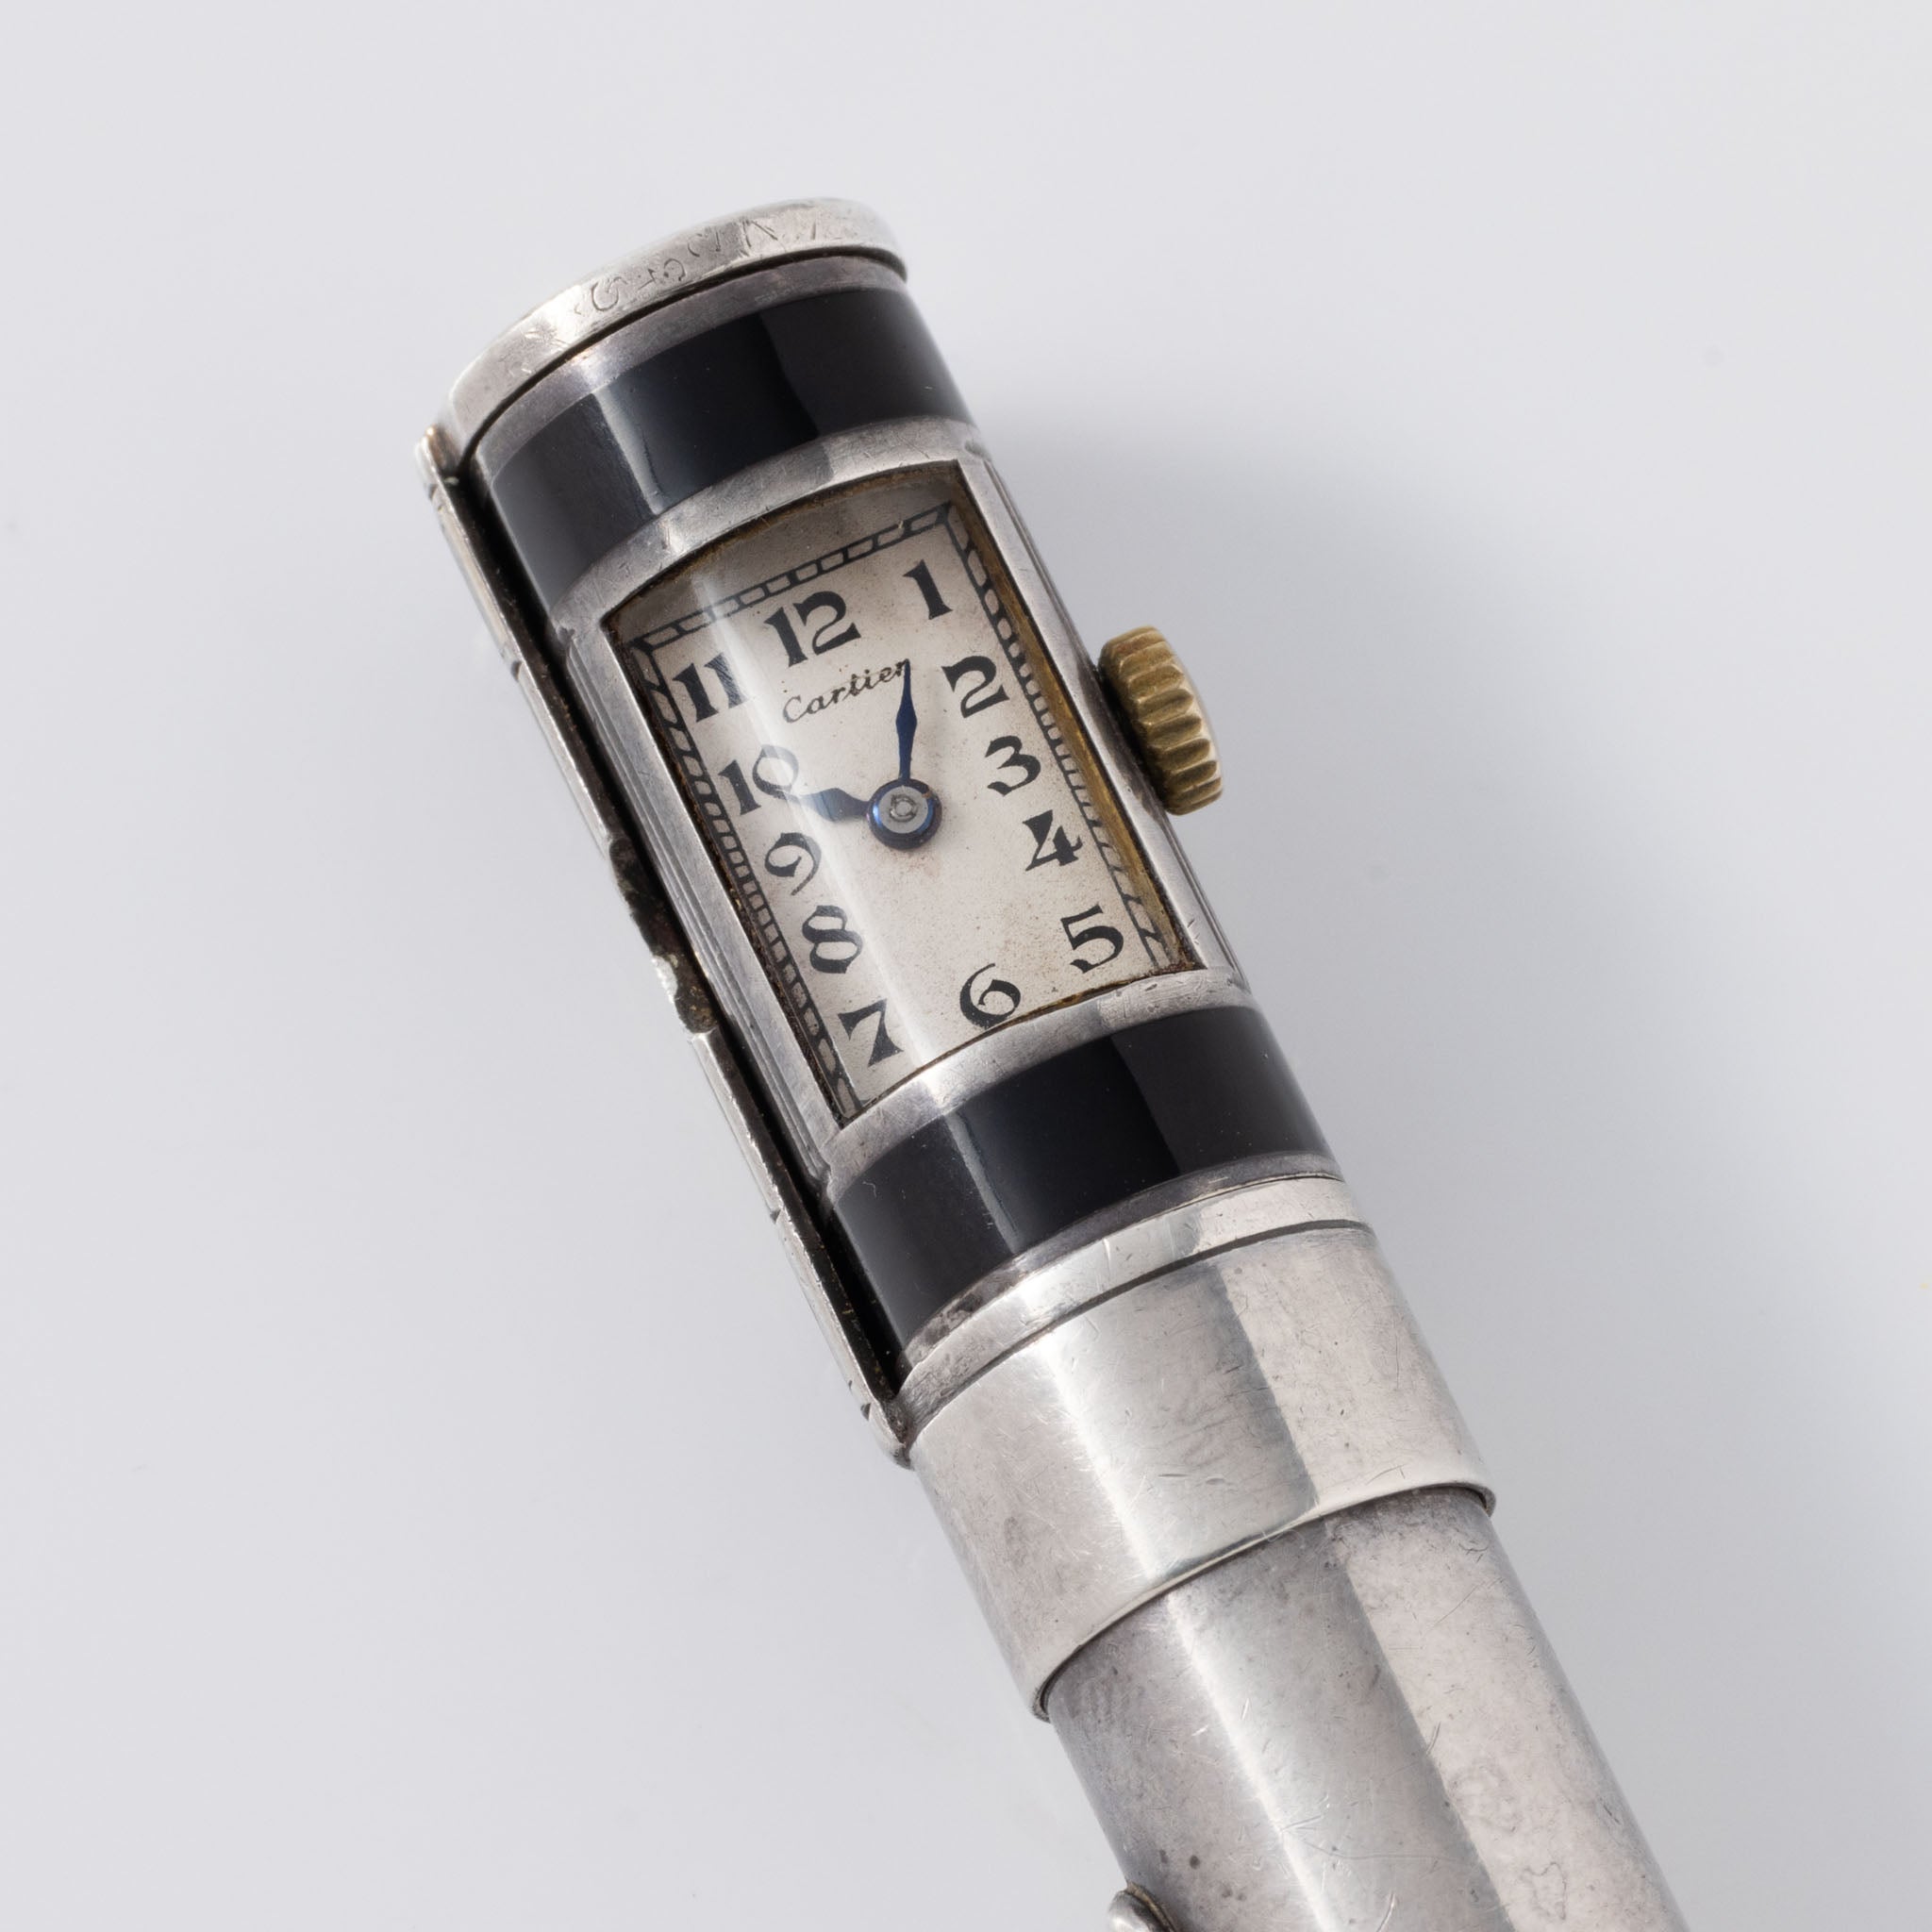 Cartier Art Deco Pencil Watch with Concealed Lighter Sterling Silver